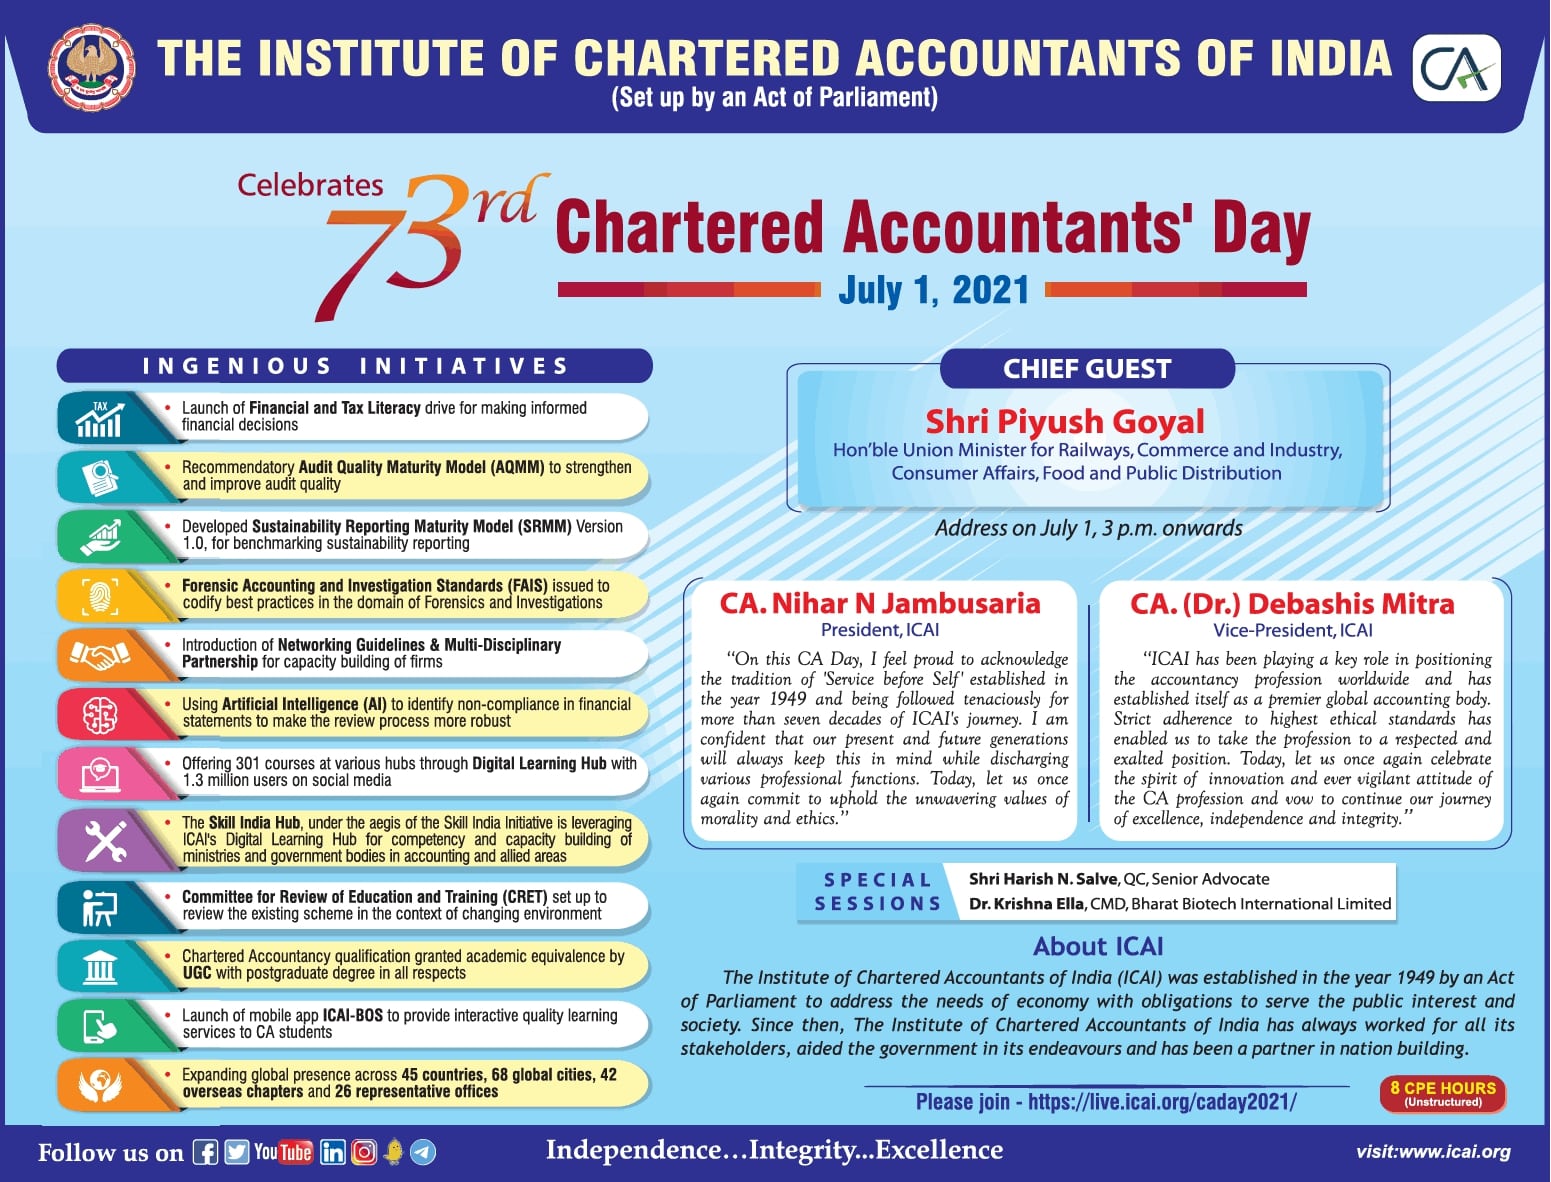 the-institute-of-charted-accountants-of-india-celebrates-73rd-chartered-accountants-day-ad-times-of-india-mumbai-01-07-2021